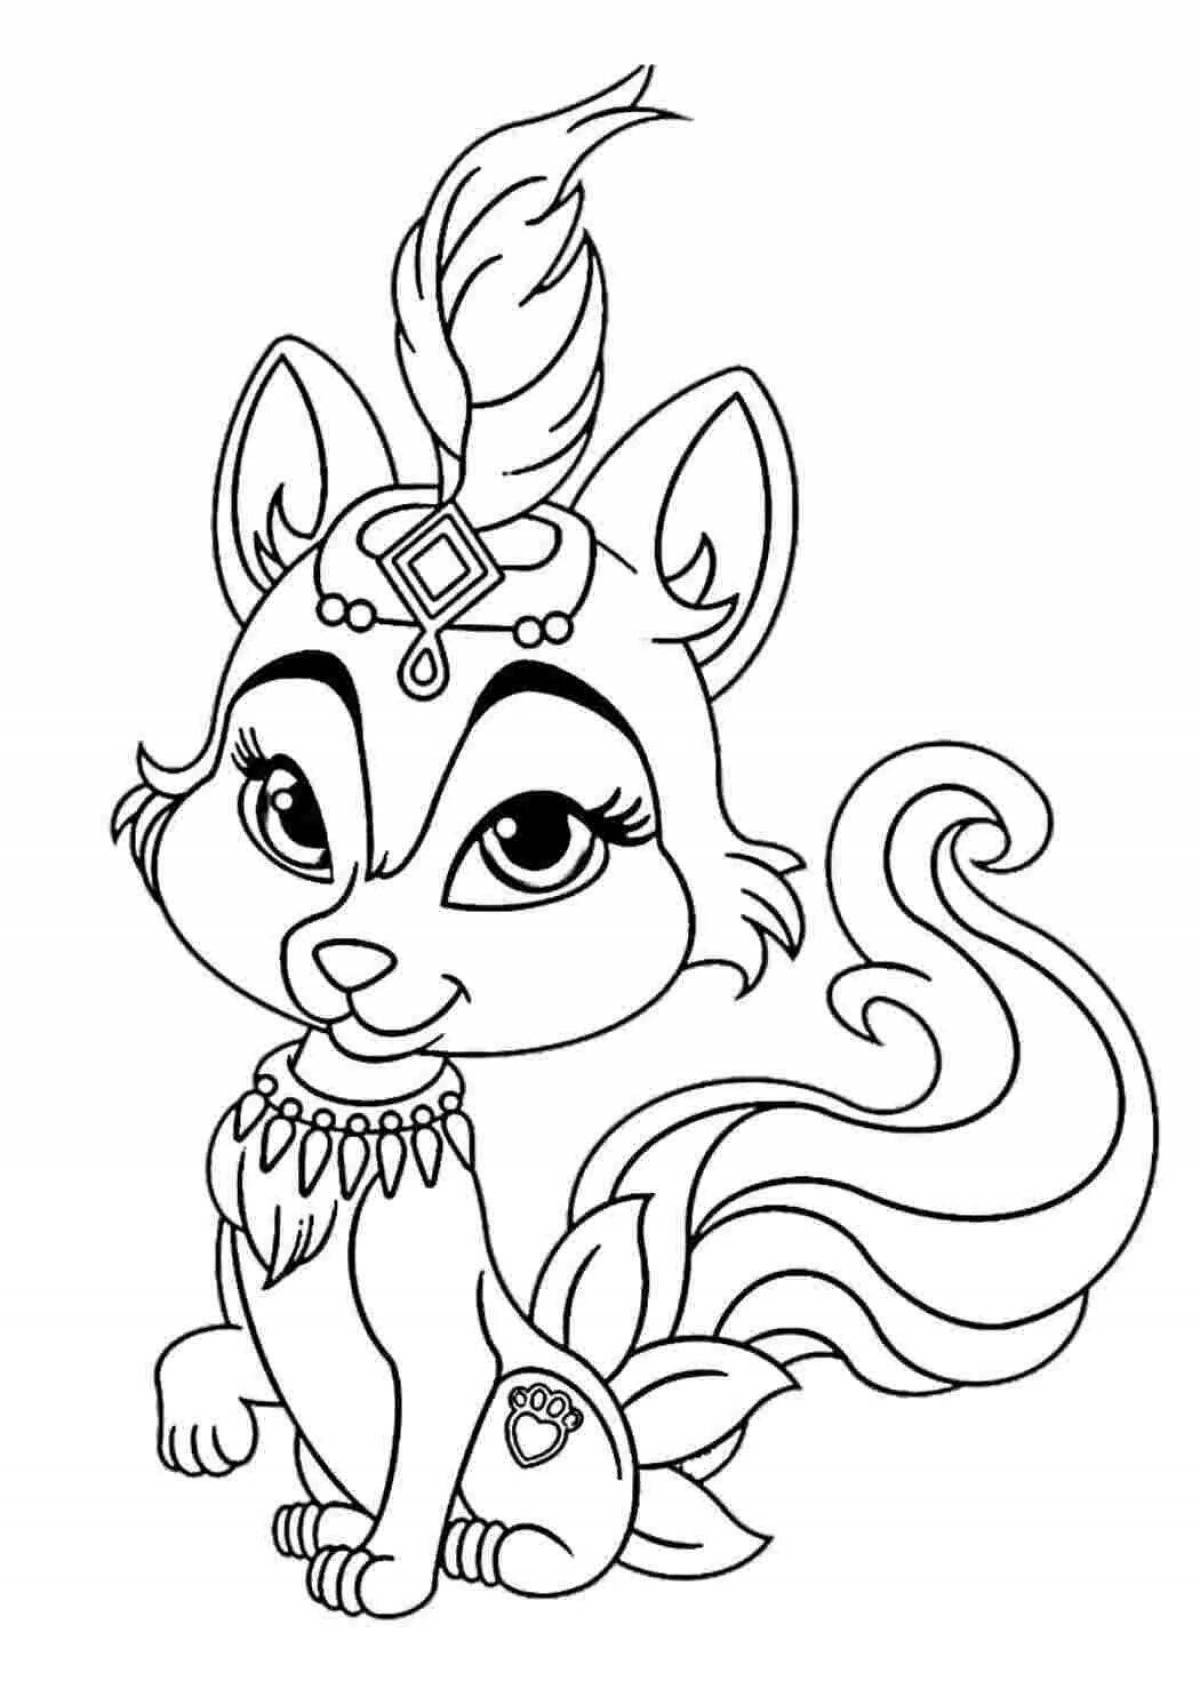 Disney playful pets coloring page